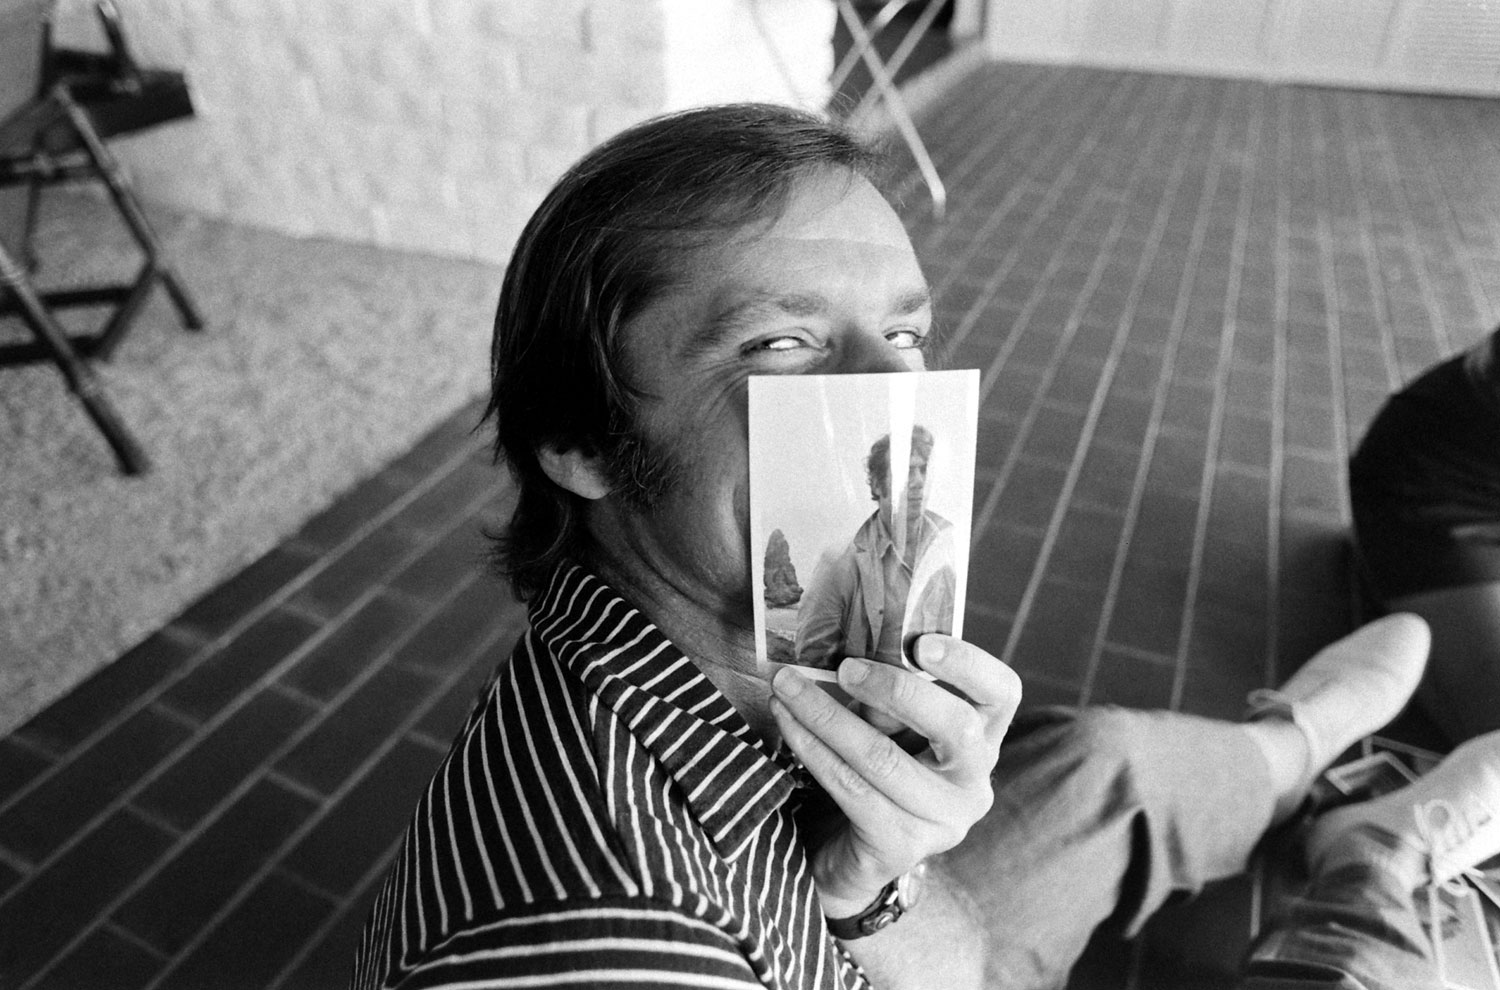 Jack Nicholson clowns around at his home with a picture of his friend, the film director Bob Rafelson, Los Angeles, 1969.